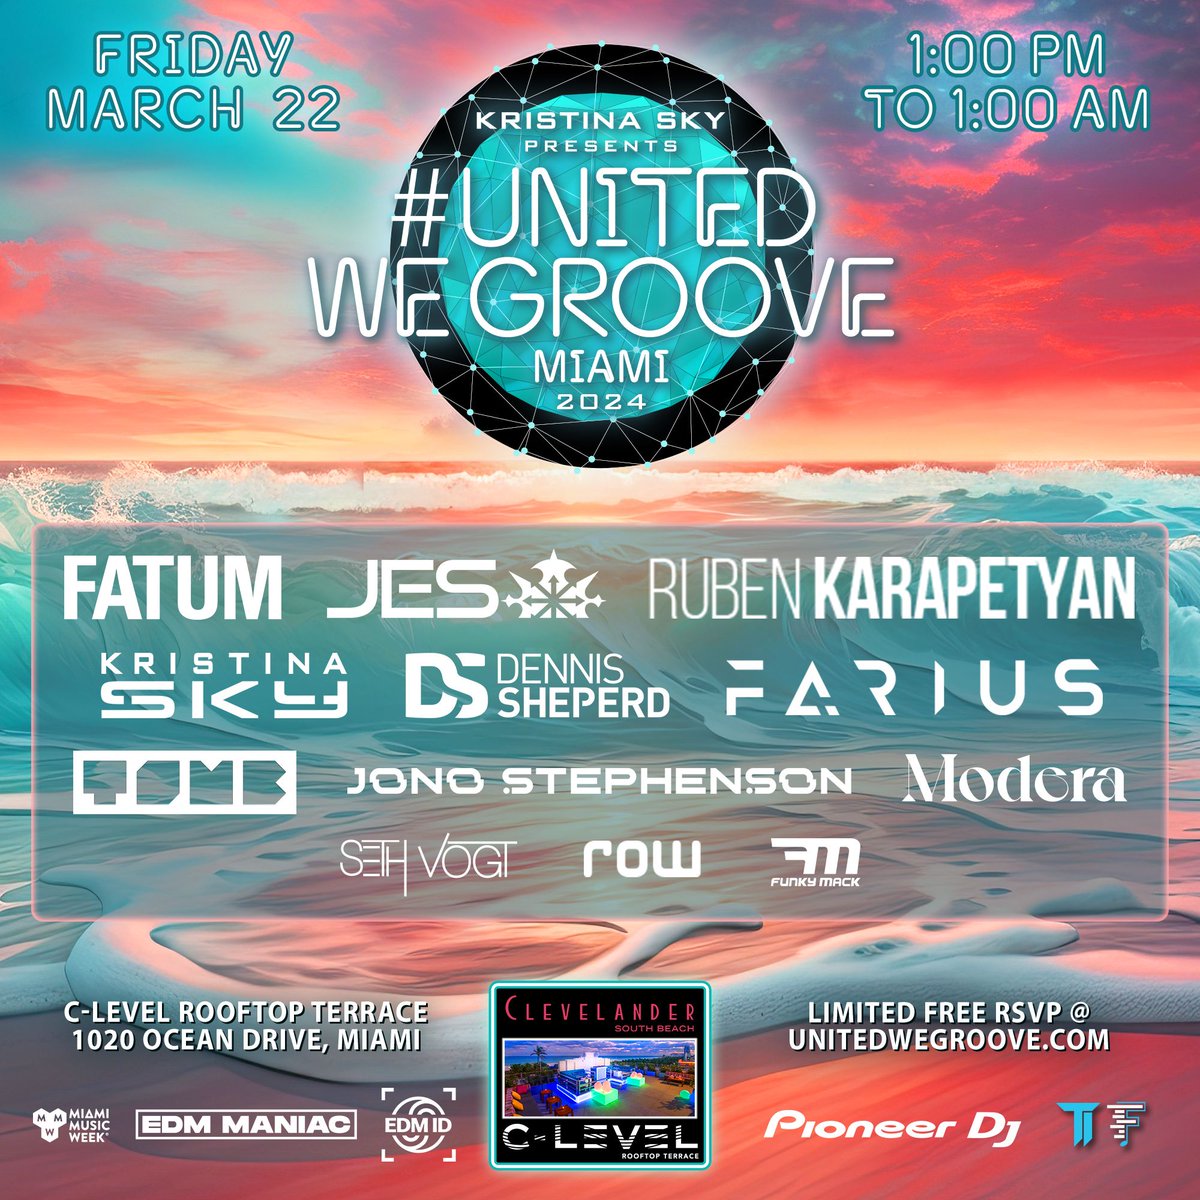 Final Phase 3 was dropped for @UnitedWeGroove_ #MMW Miami 2024 rooftop party presented by @KristinaSky! @Official_JES along with @fariusmusic have been added!Just over 1 week left & hope to see you all there!FREE RSVP shorturl.at/cfwMP @EDMManiac @EDMIdentity @TranceIDChi